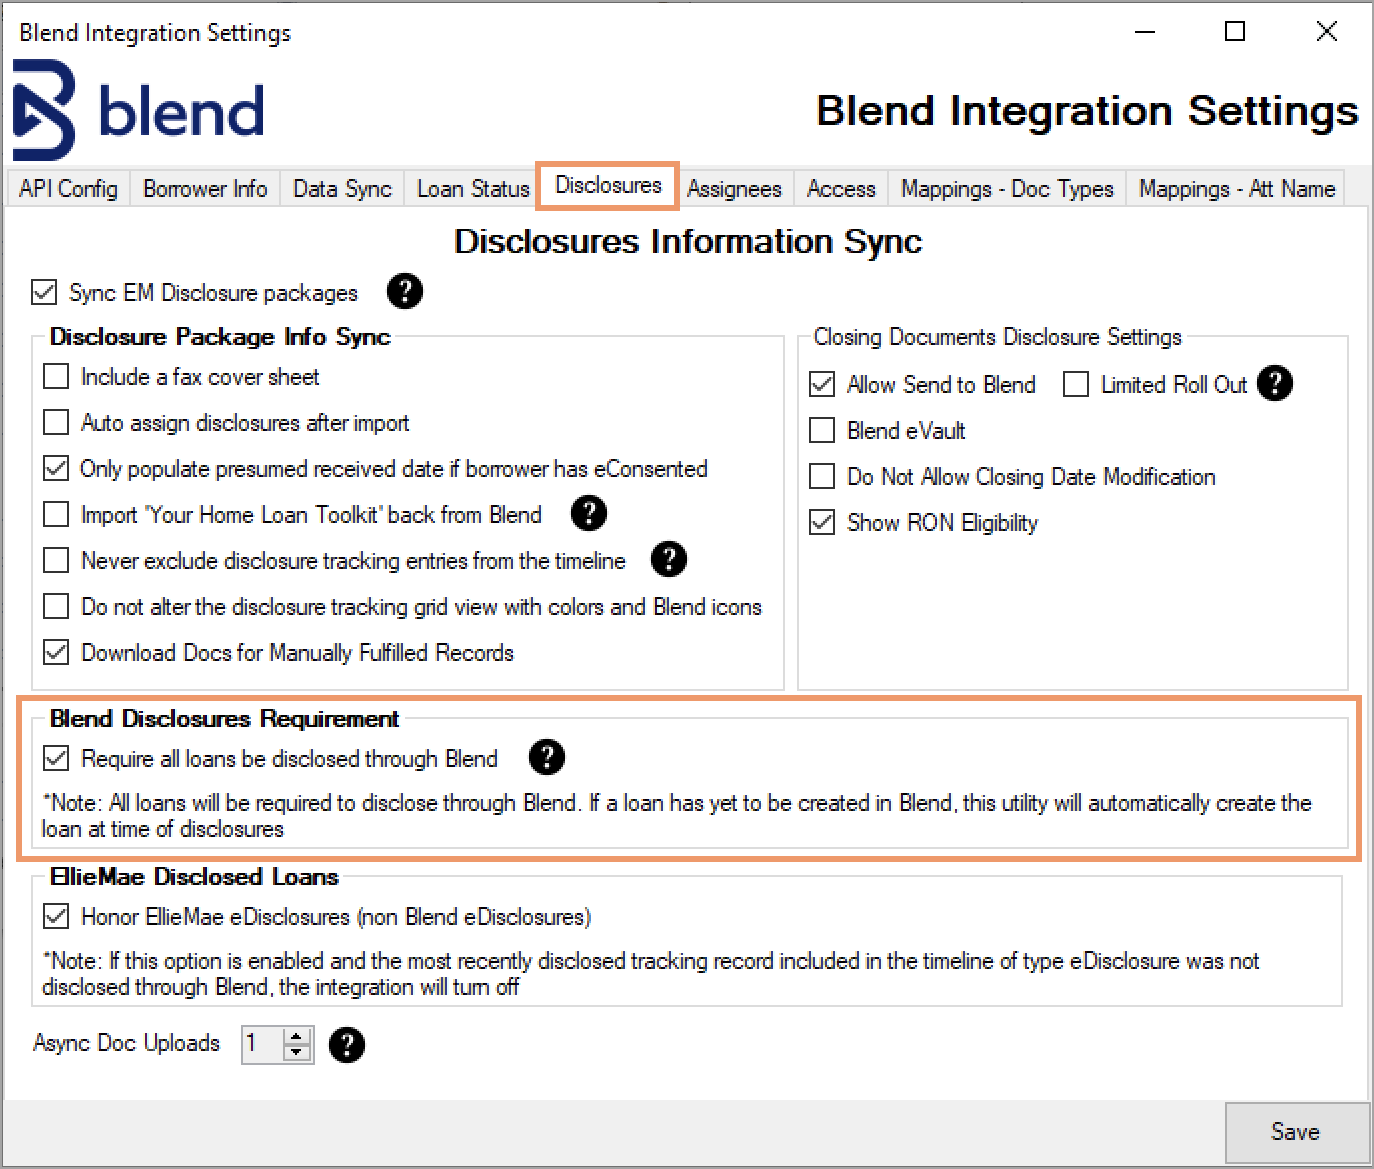 blend_integration_settings_blend_ds_requirement.png